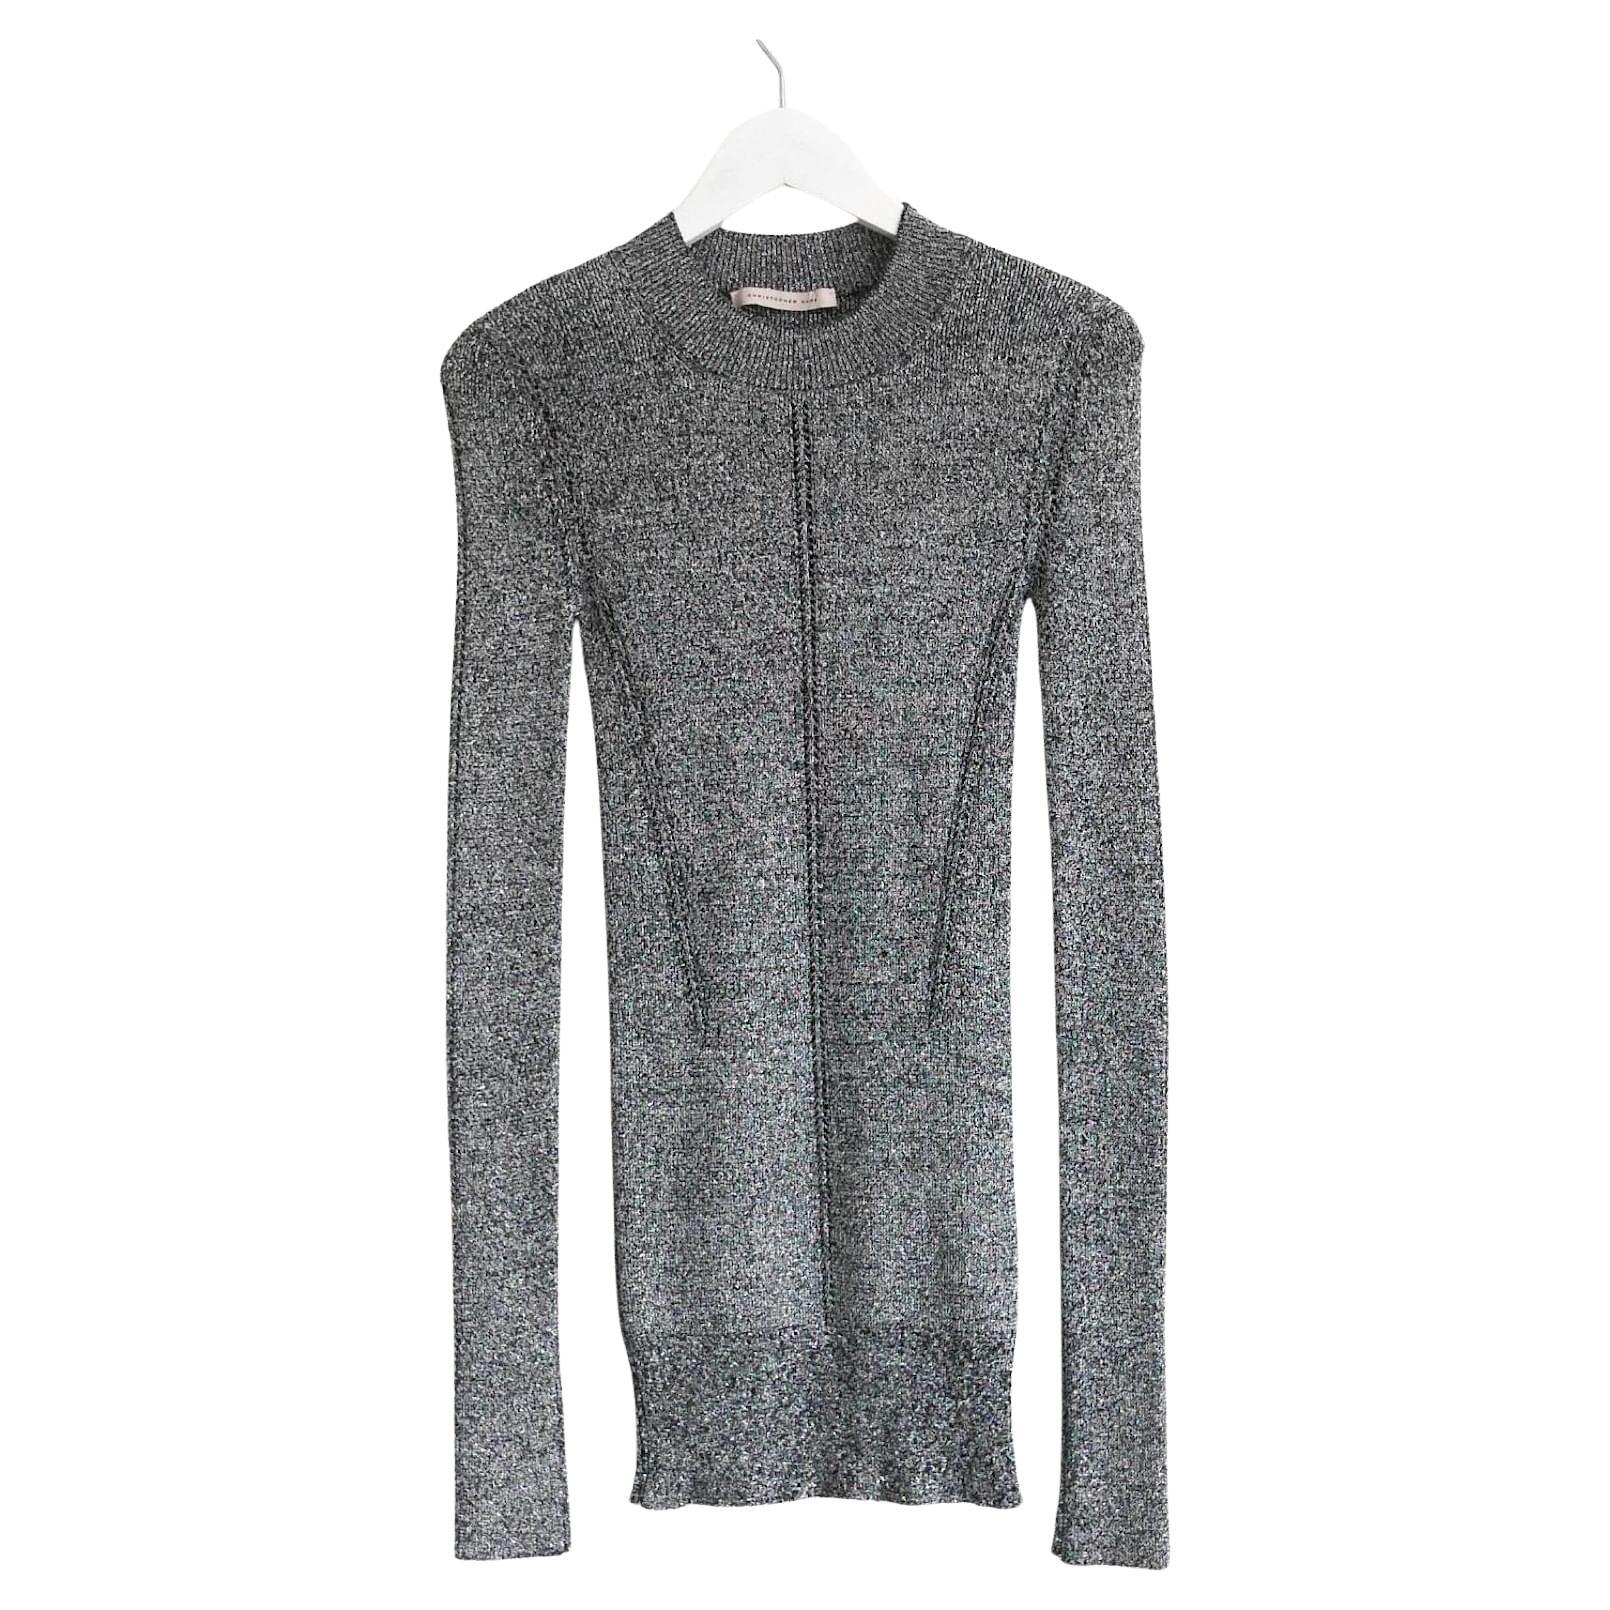 Christopher Kane silver lurex knit skinny sweater For Sale